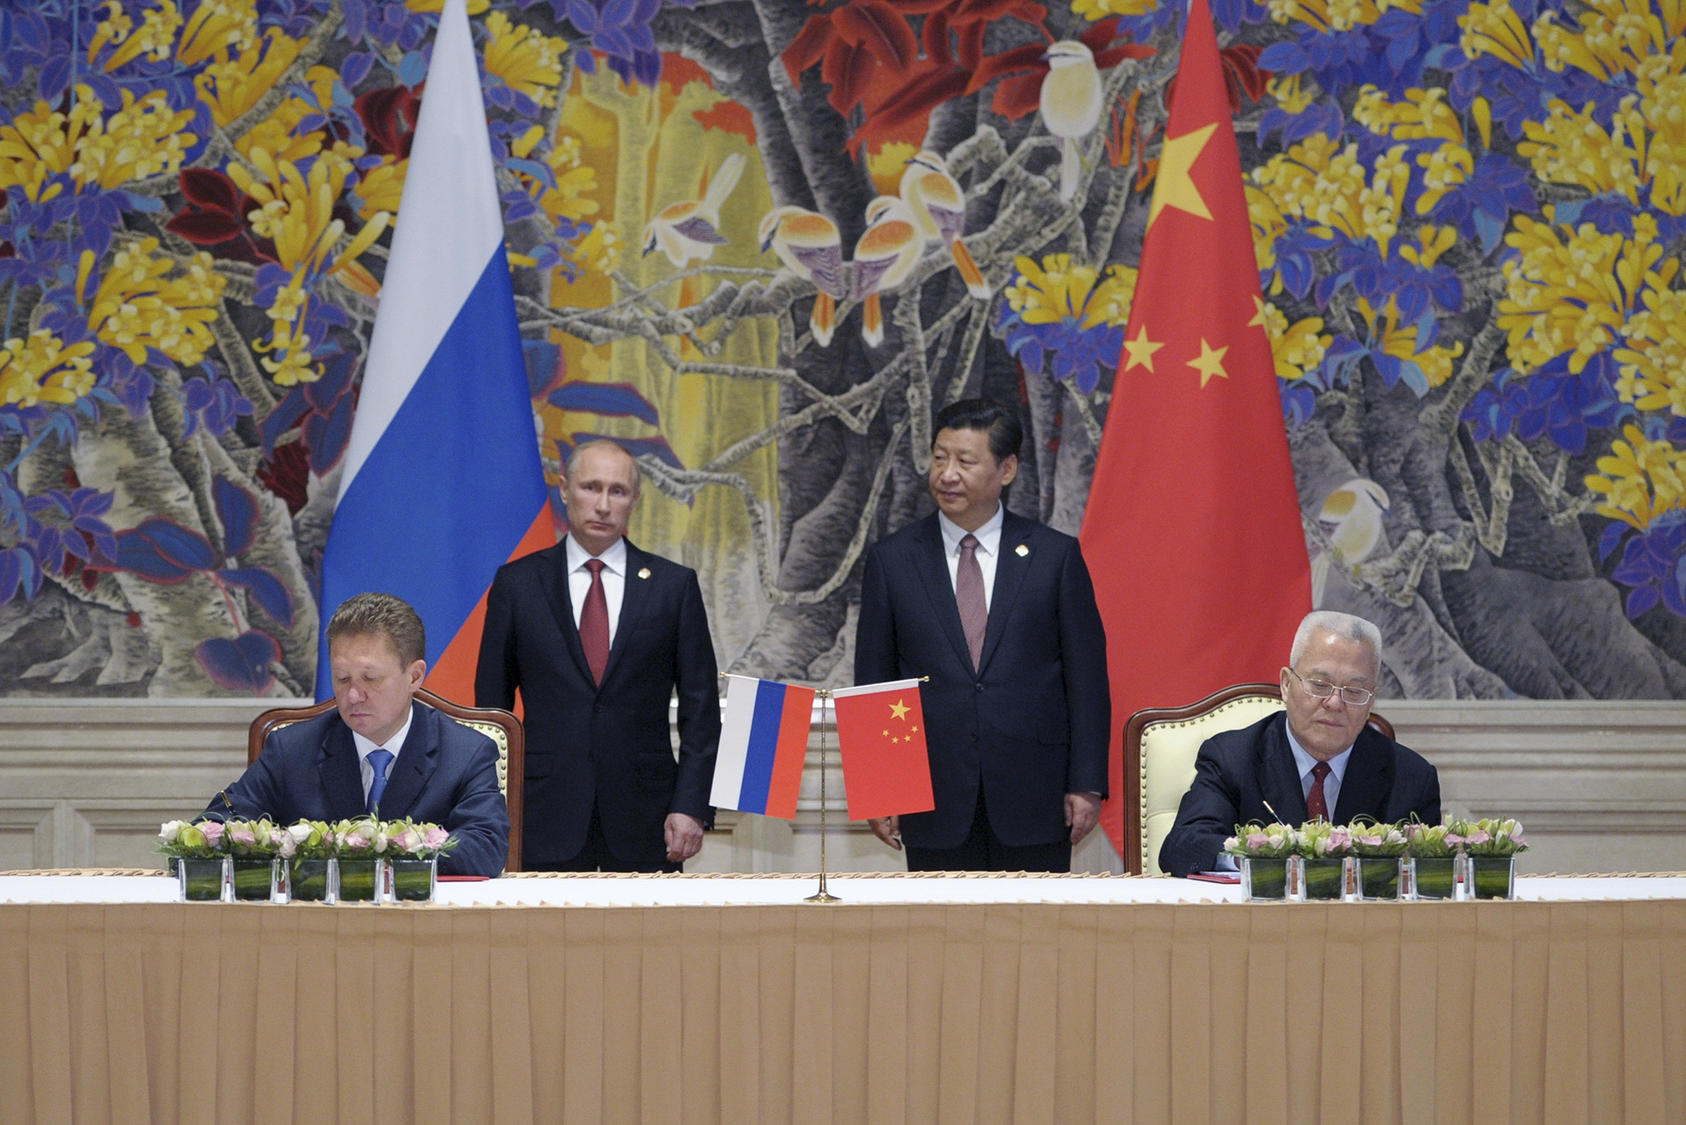 Russian President Vladimir Putin and Chinese President Xi Jinping in Shanghai, May 2014. Beijing has signaled it will step in to fill a void of support for Myanmar’s junta, as Moscow is consumed with its invasion of Ukraine. (Alexei Druzhinin/RIA Novosti/Pool via The New York Times)